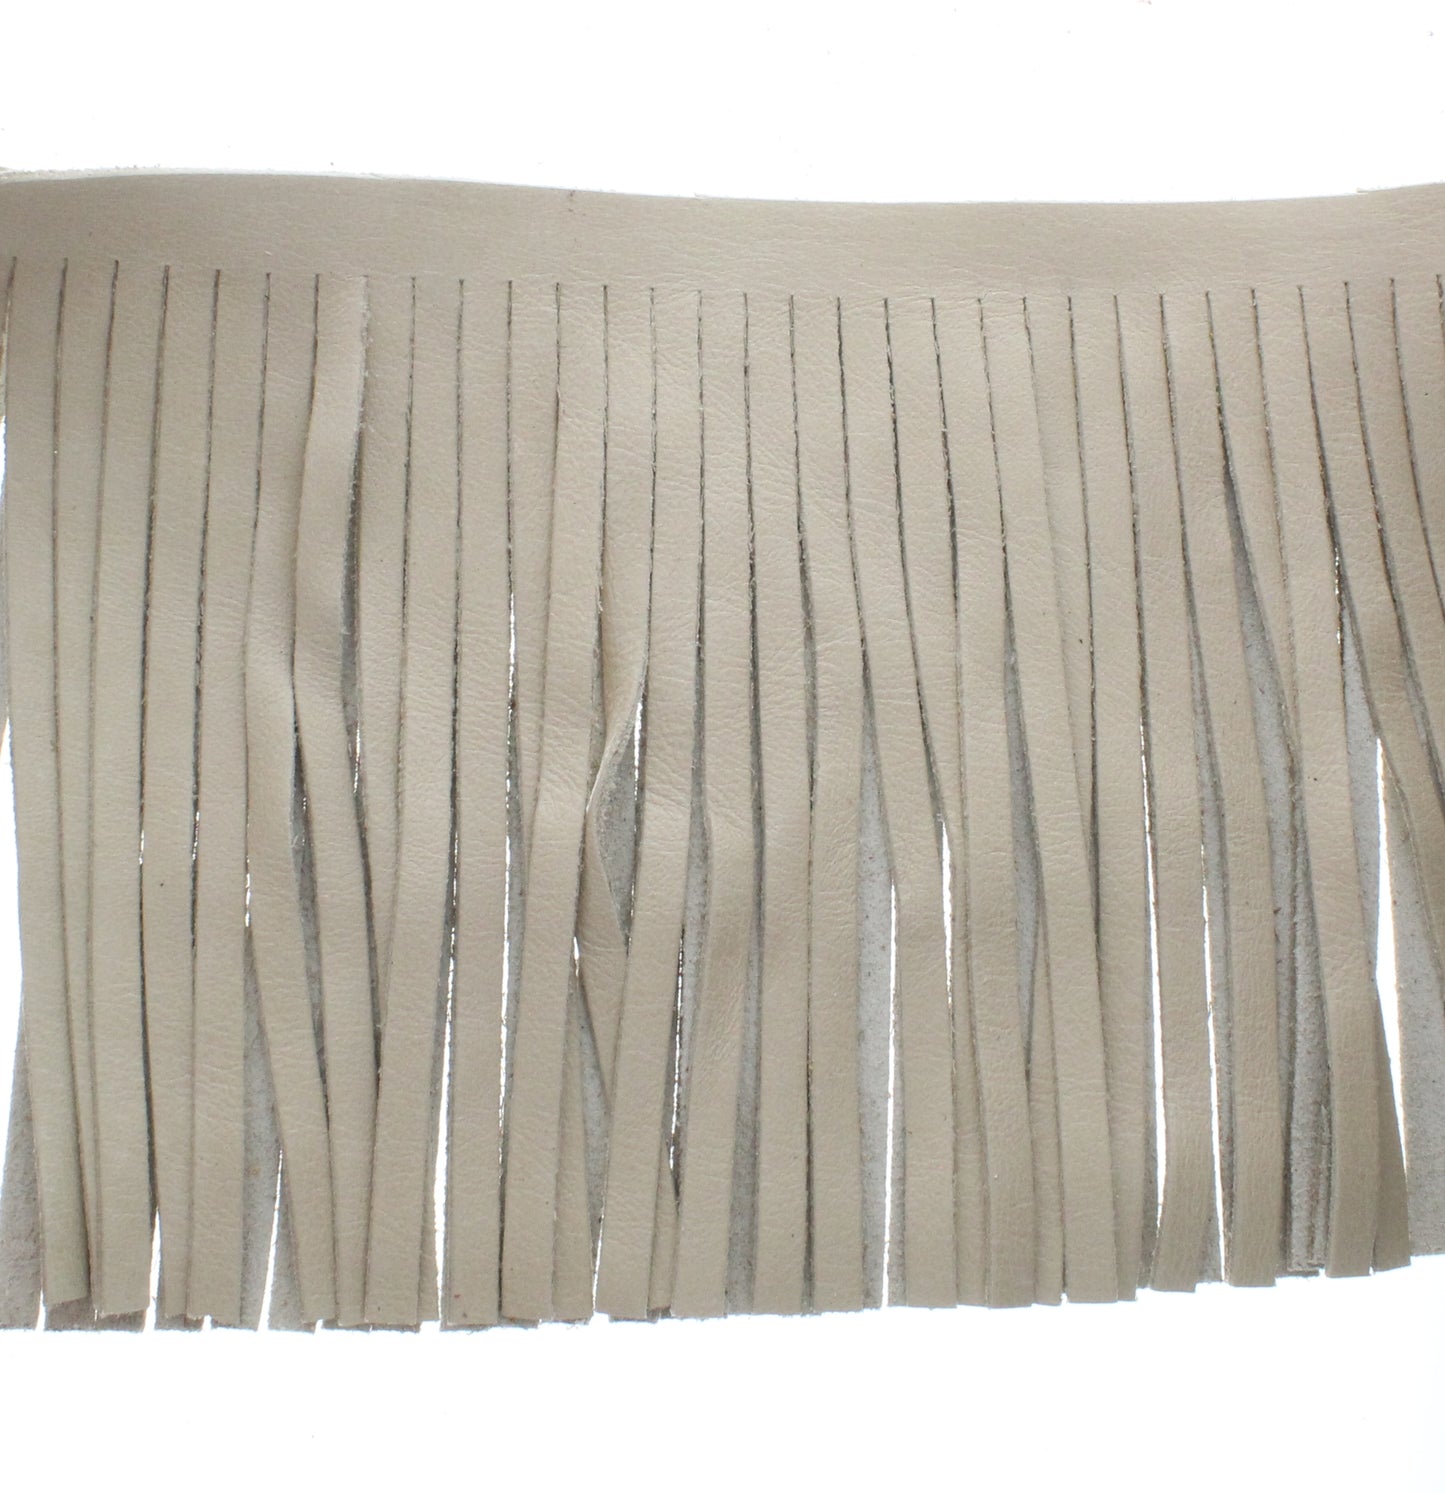 Khaki-Tan Leather Fringe, Made in the USA, sold by ft.